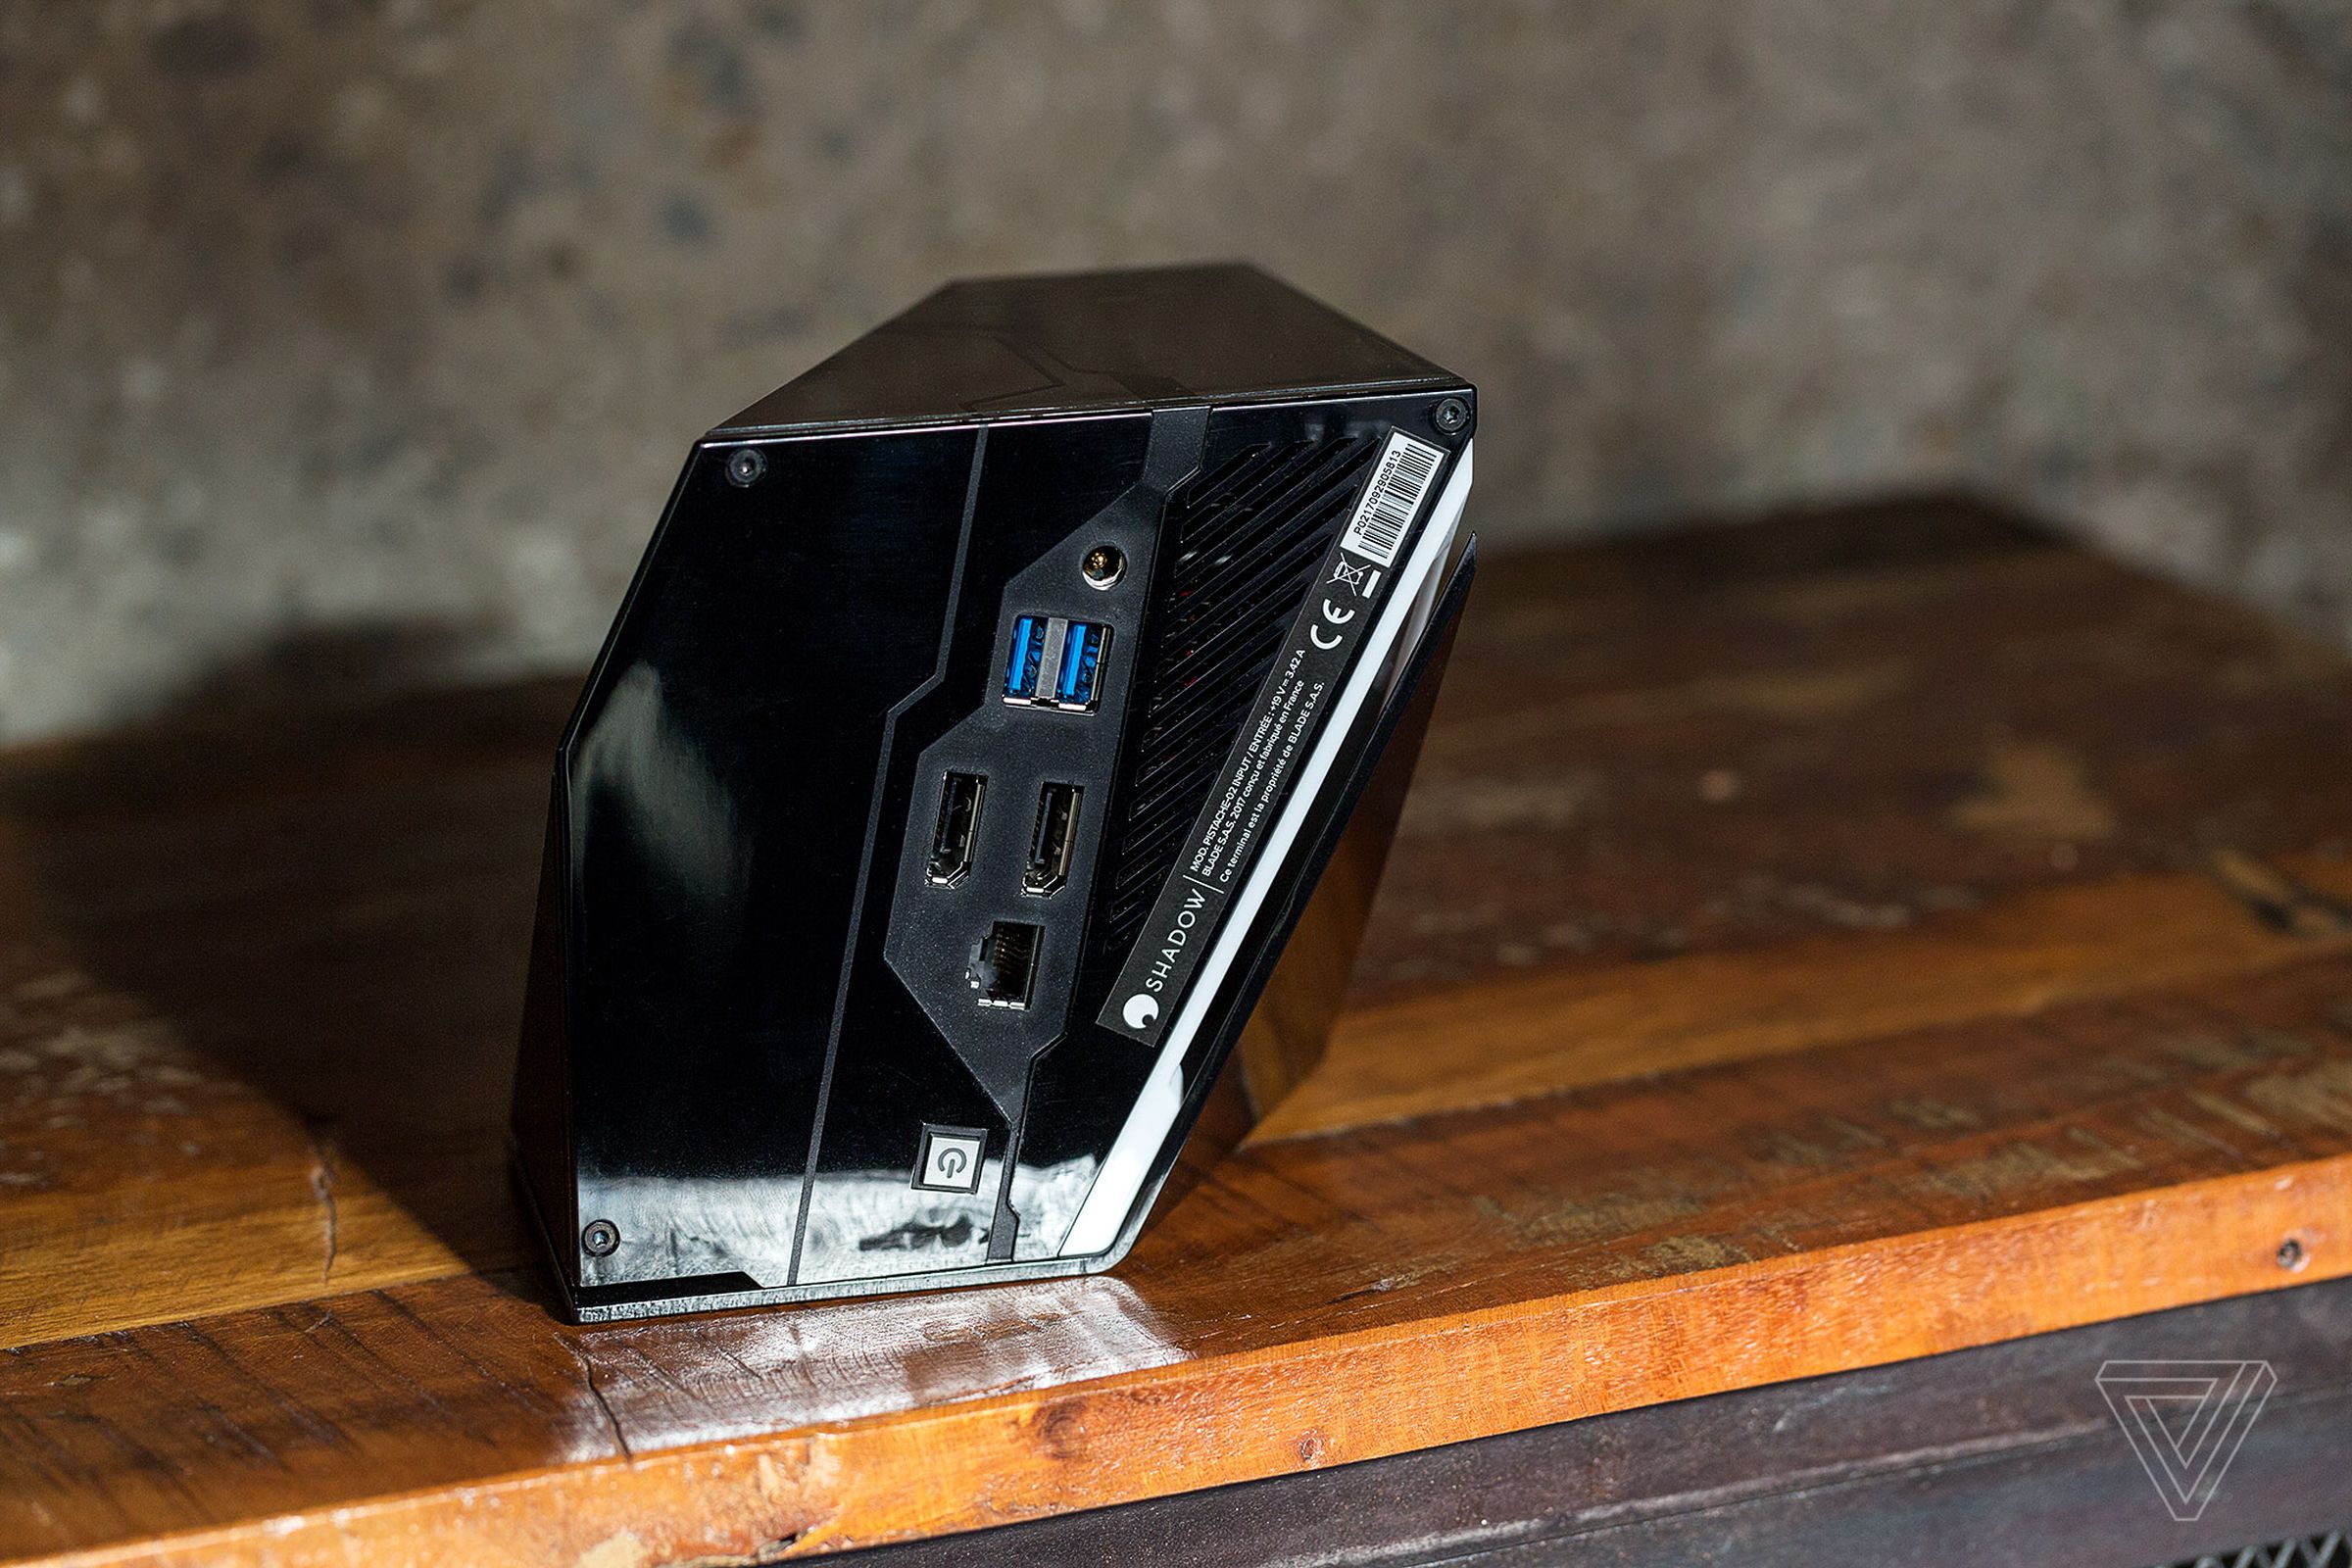 The Shadow Box is a video decoder for handling changes in frame rate and resolution while streaming. Shadow users can plug in a monitor, keyboard, mouse, headset, and ethernet to effectively create a desktop Windows 10 gaming PC.